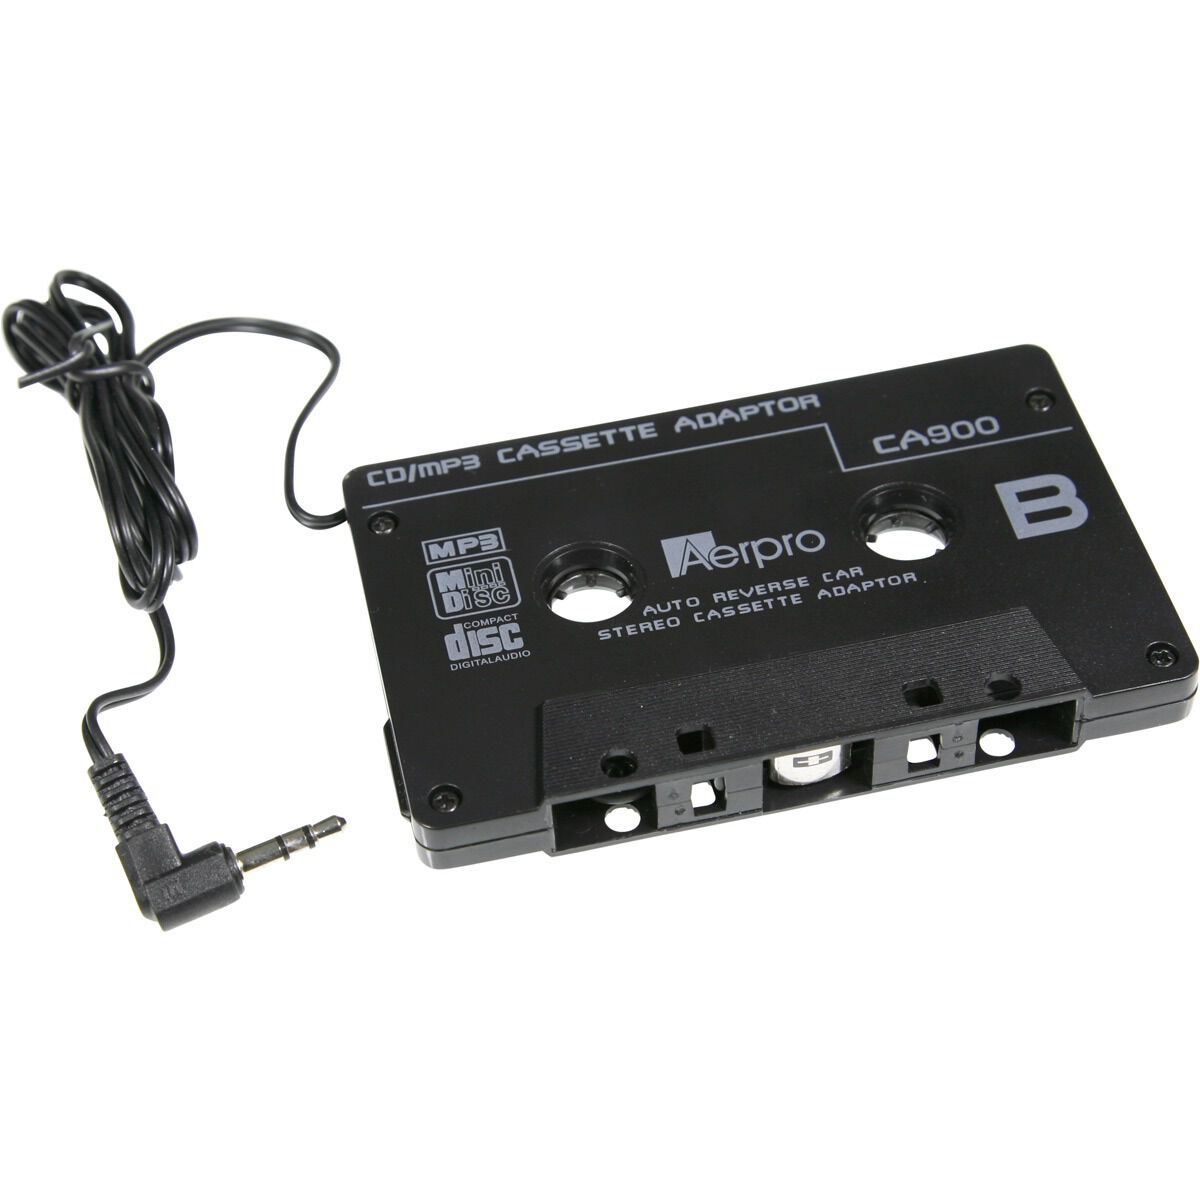 How to Install a Cassette Adaptor with Bluetooth! 